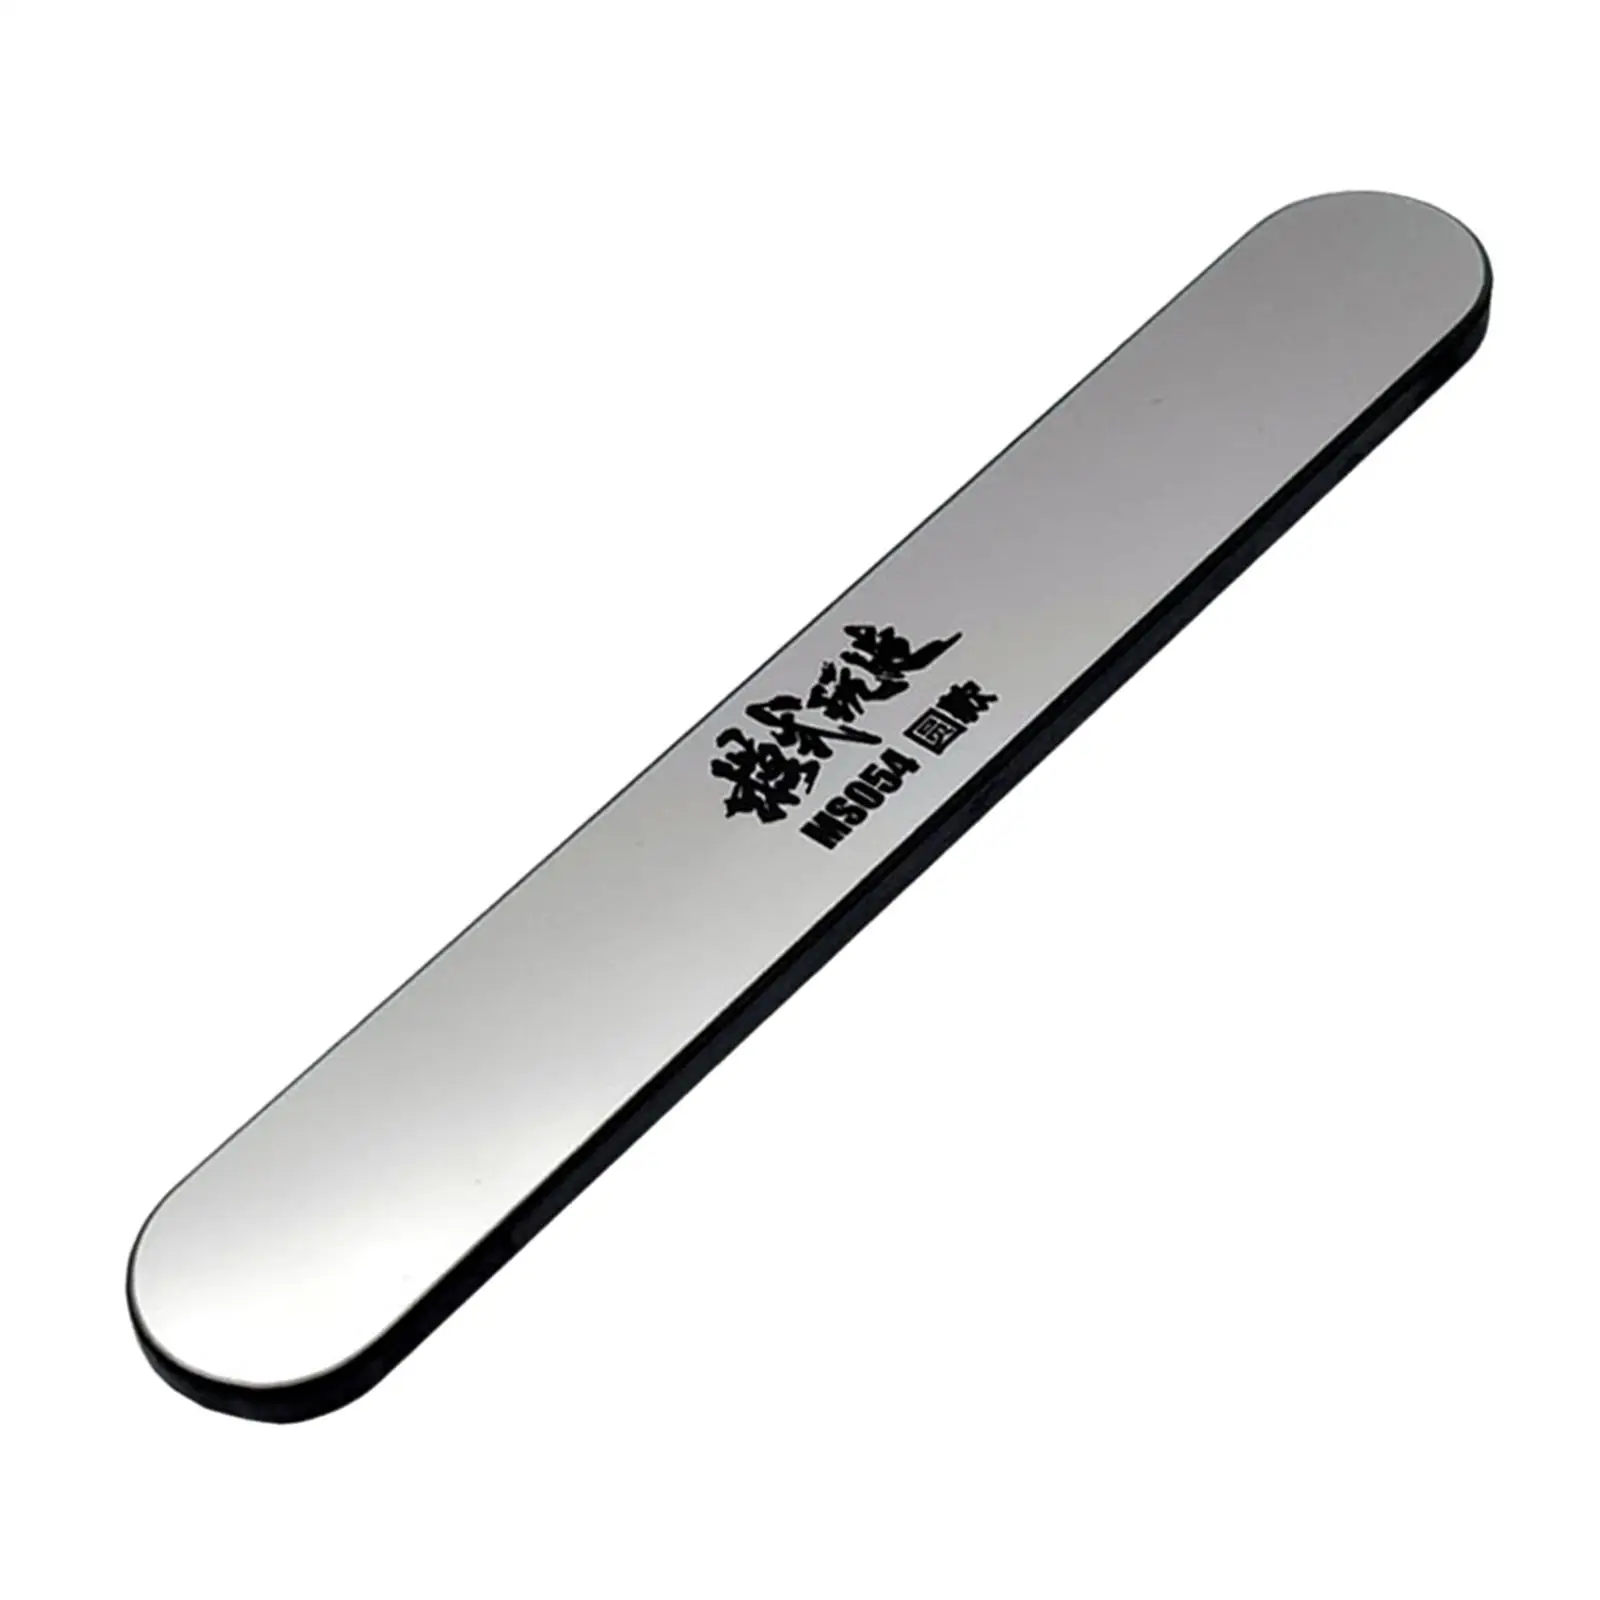 Precision Glass File for Gundam Model Hobby Polishing and for Car and Plane Kits Washable DIY Hand Tools Grinding Tools